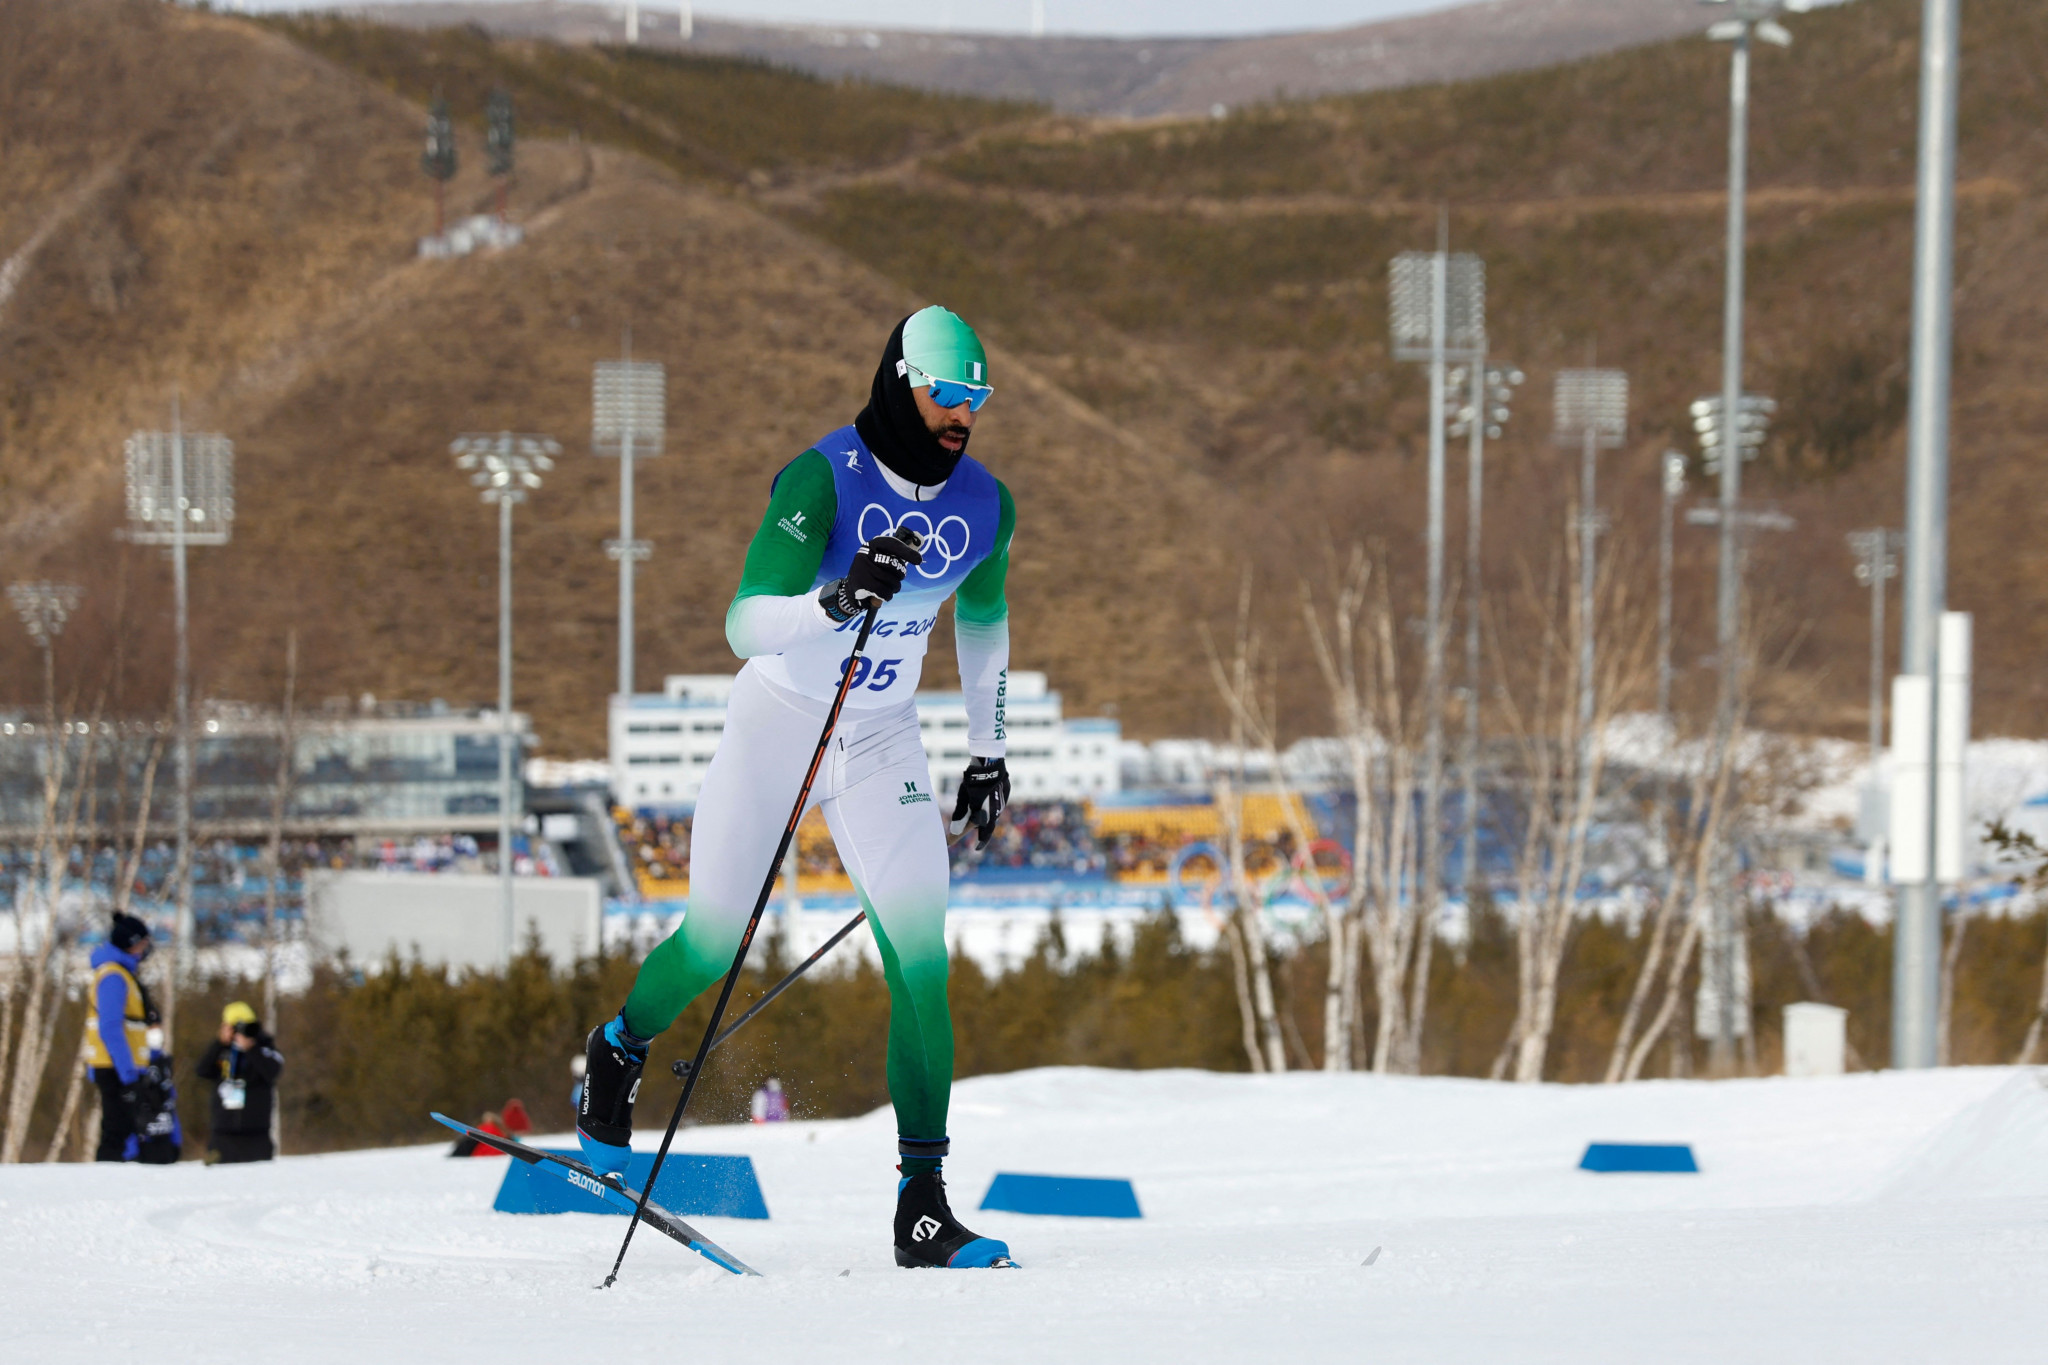 Nigerian cross-country skier Samuel Ikpefan is among six African athletes competing at Beijing 2022, which is the half who were at Pyeongchang 2018 ©Getty Images